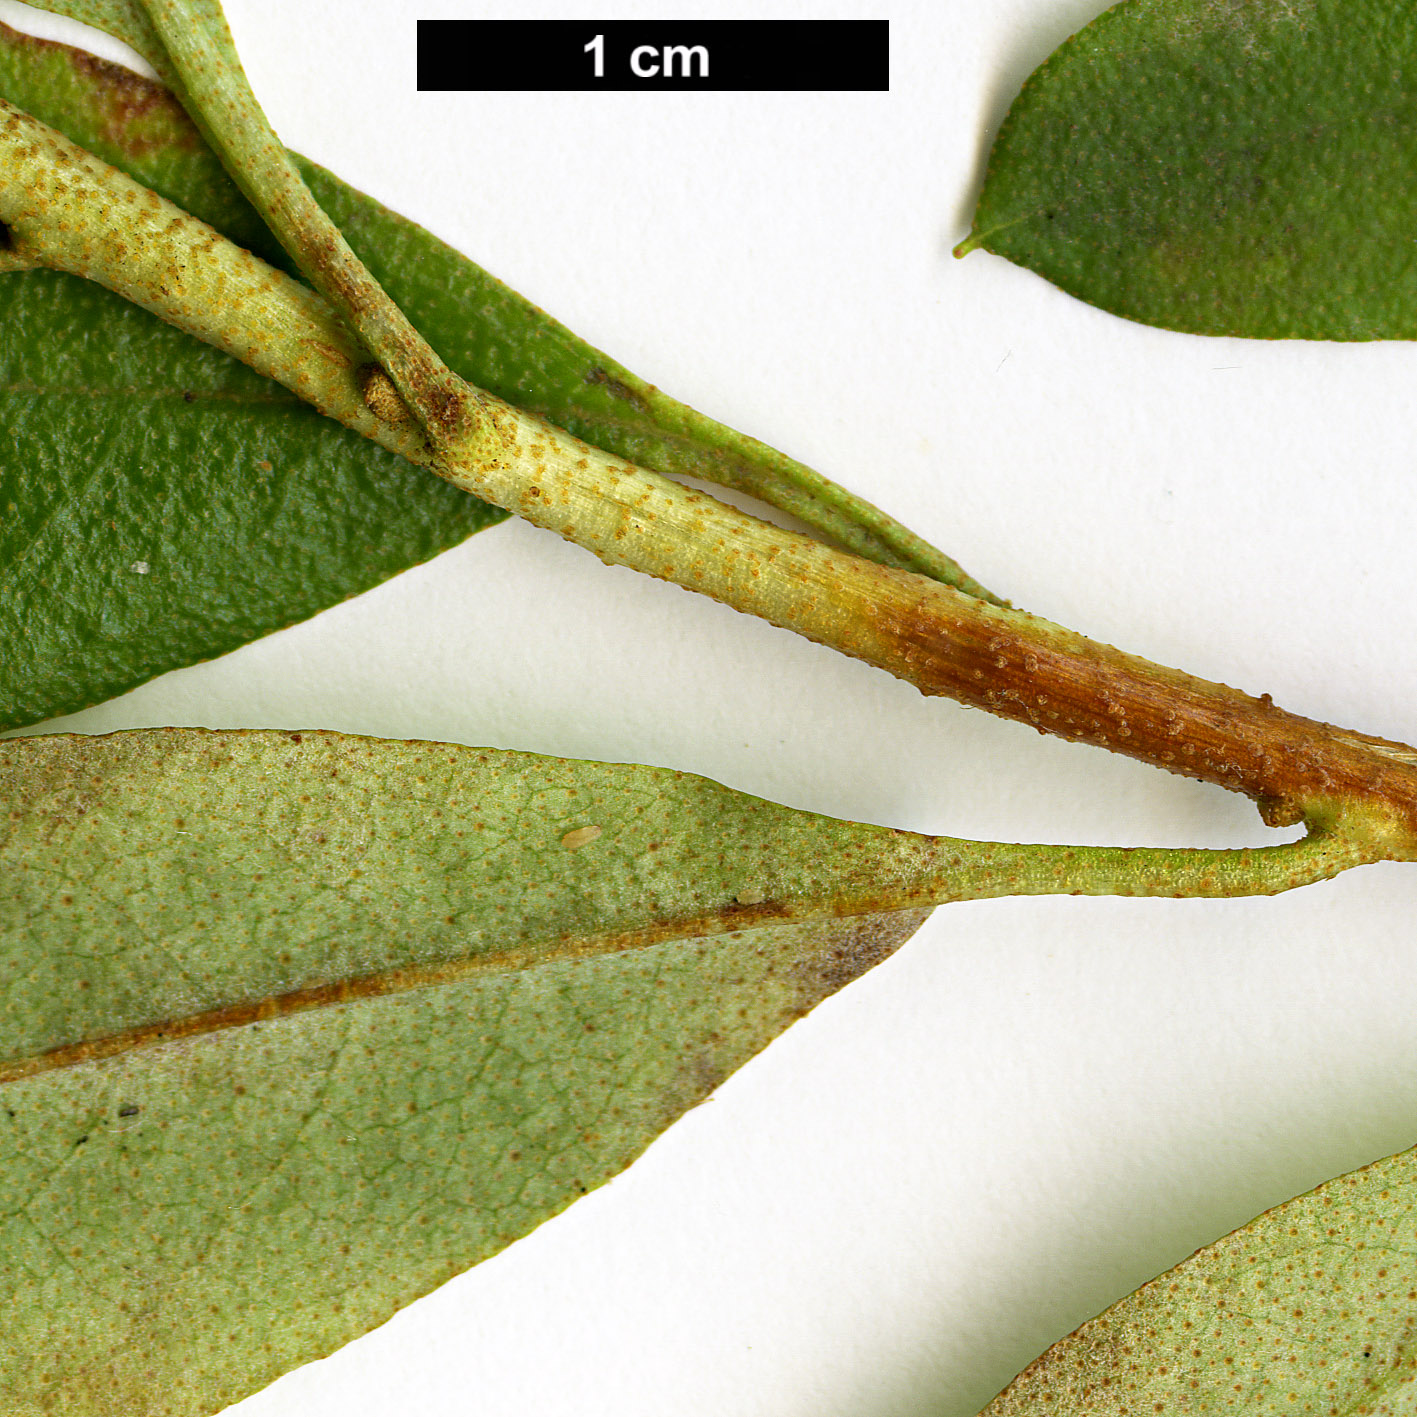 High resolution image: Family: Ericaceae - Genus: Rhododendron - Taxon: baileyi